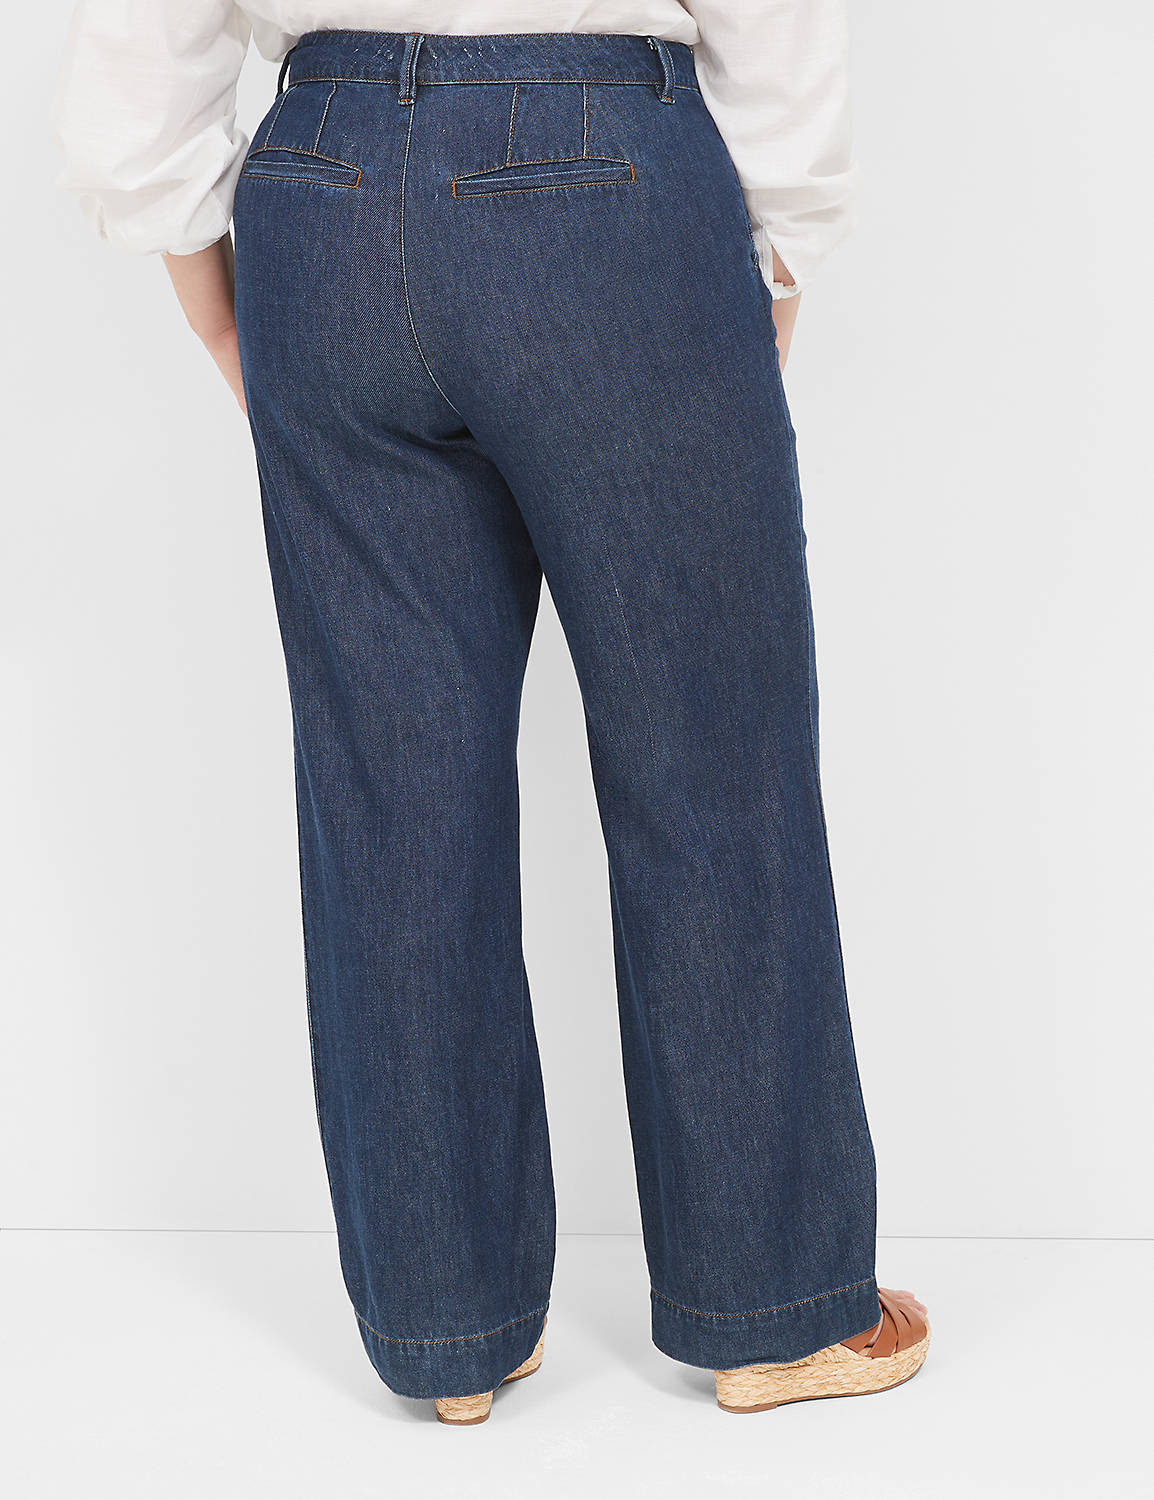 MID RISE WIDE DRESSY TROUSER - RINS Product Image 2